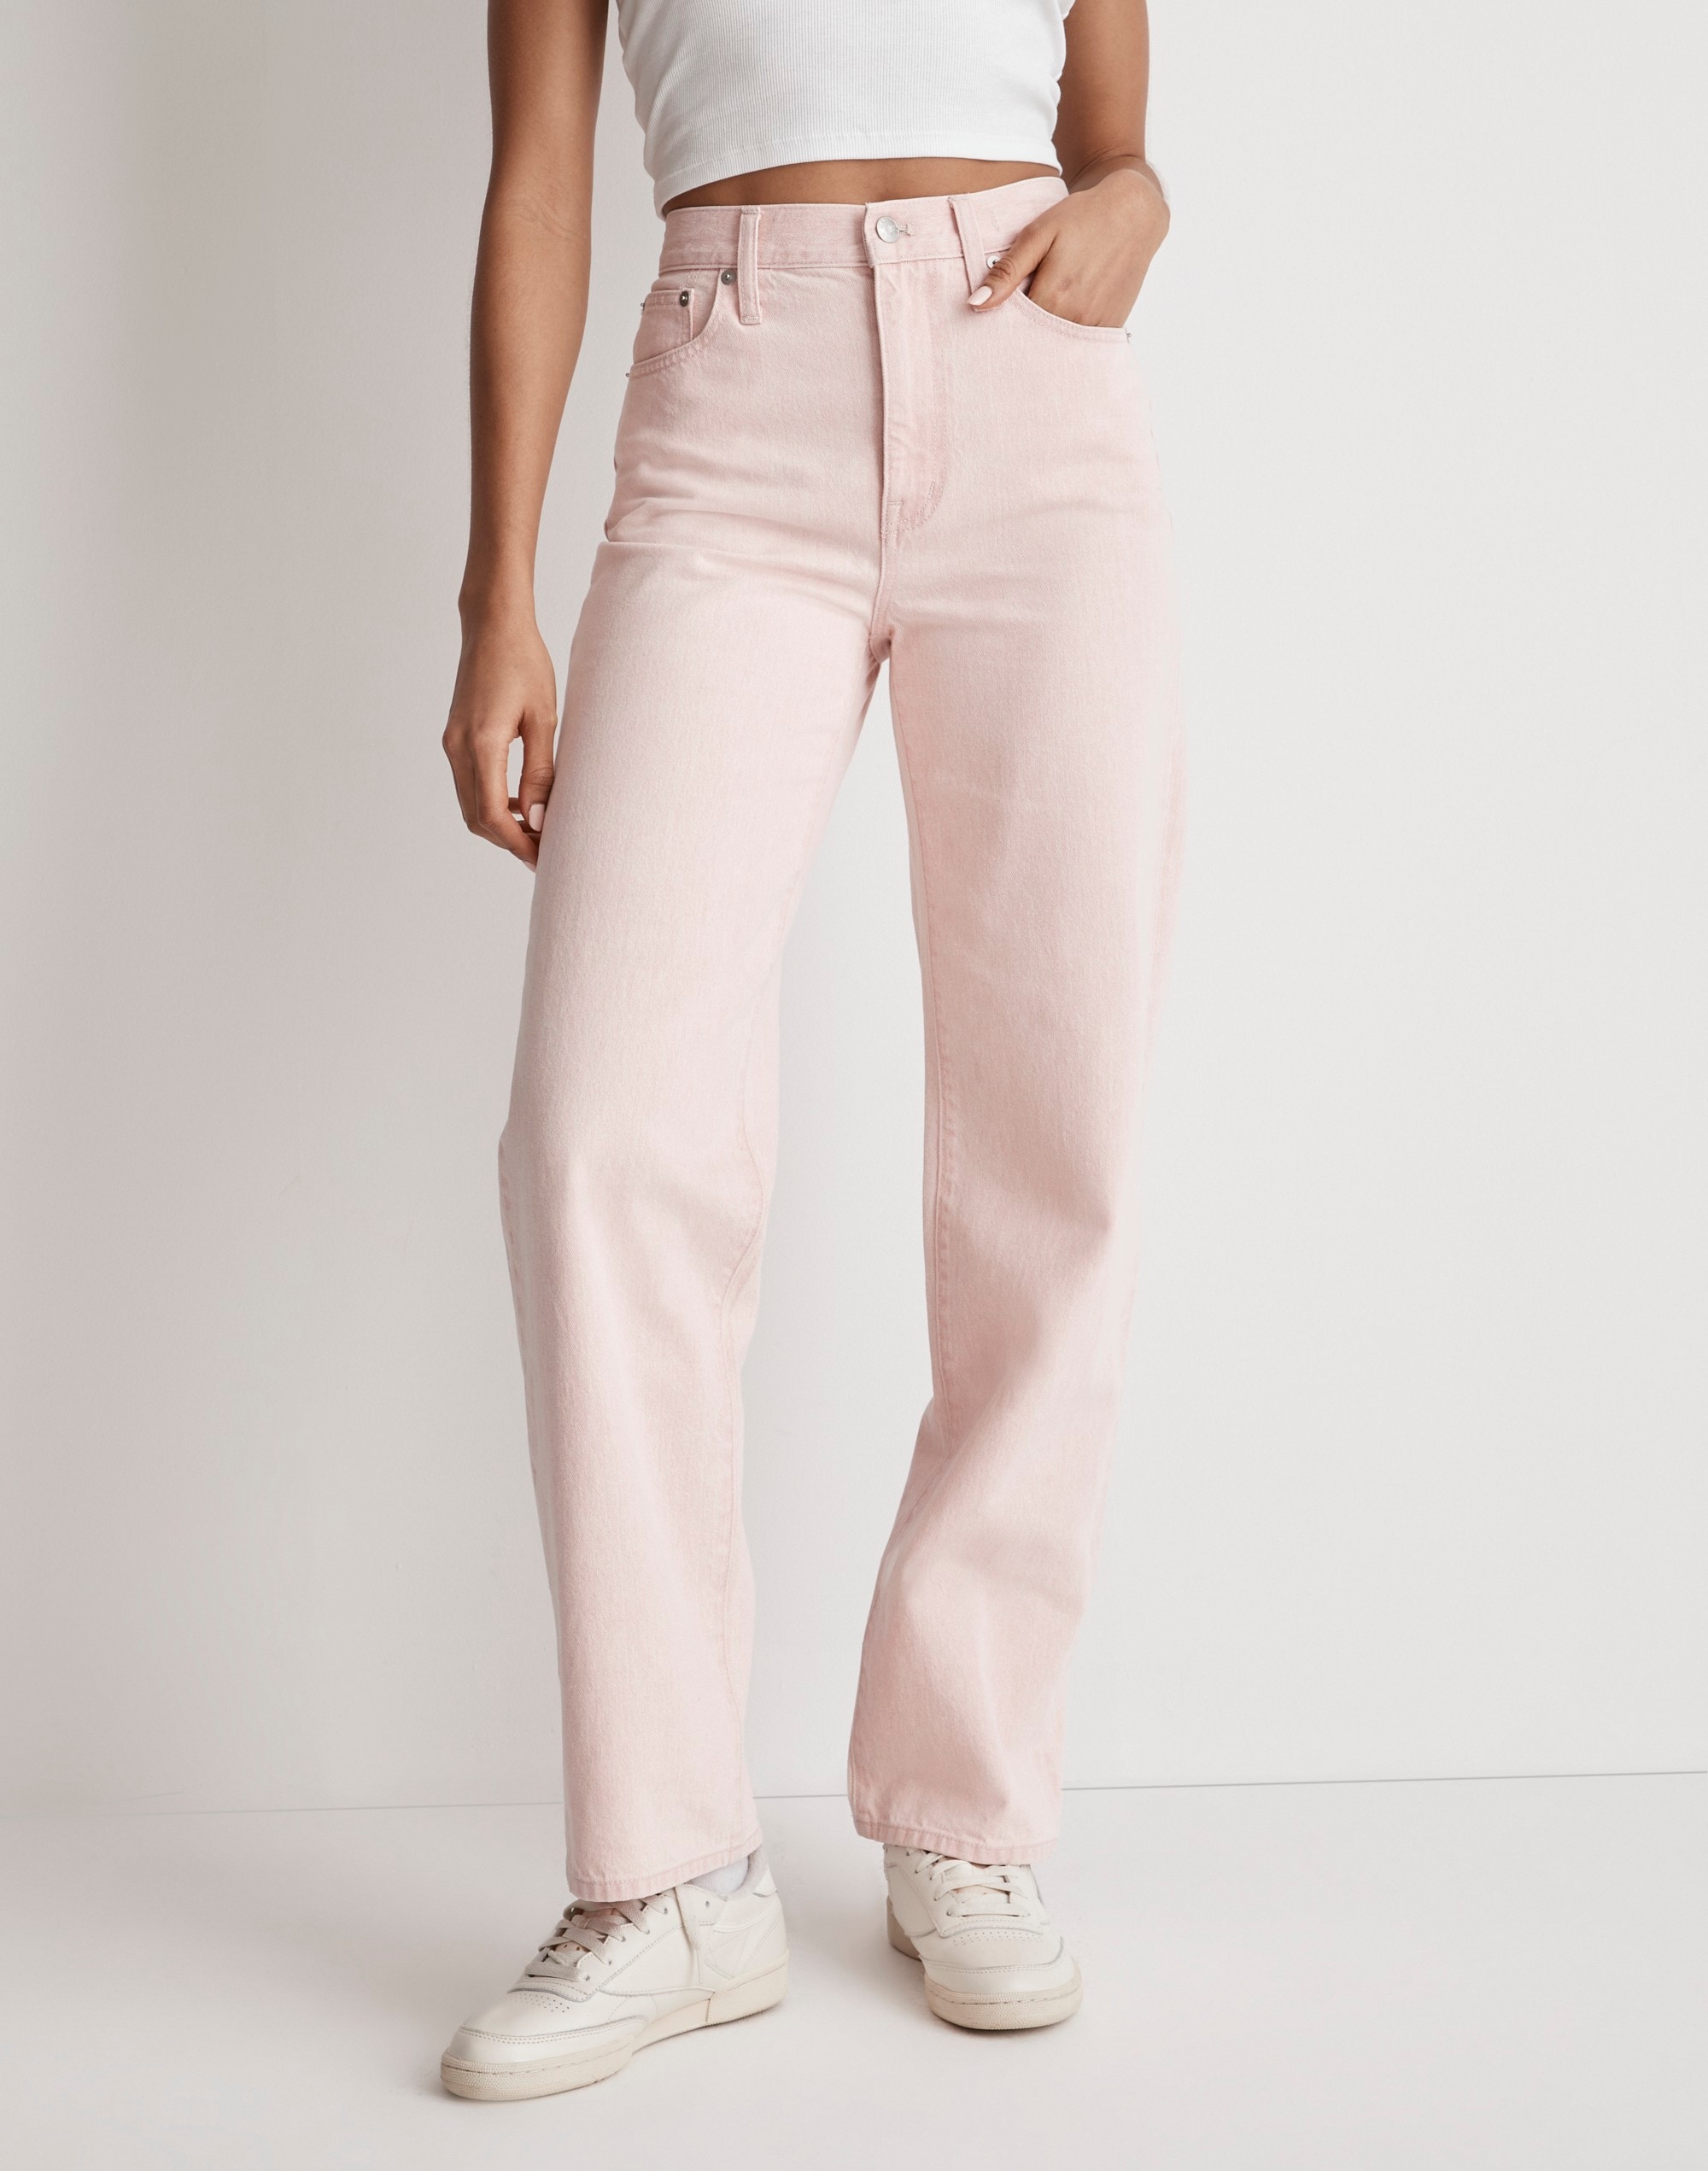 The Perfect Vintage Wide-Leg Jean in Light Pink Wash: Botanical-Dye Edition